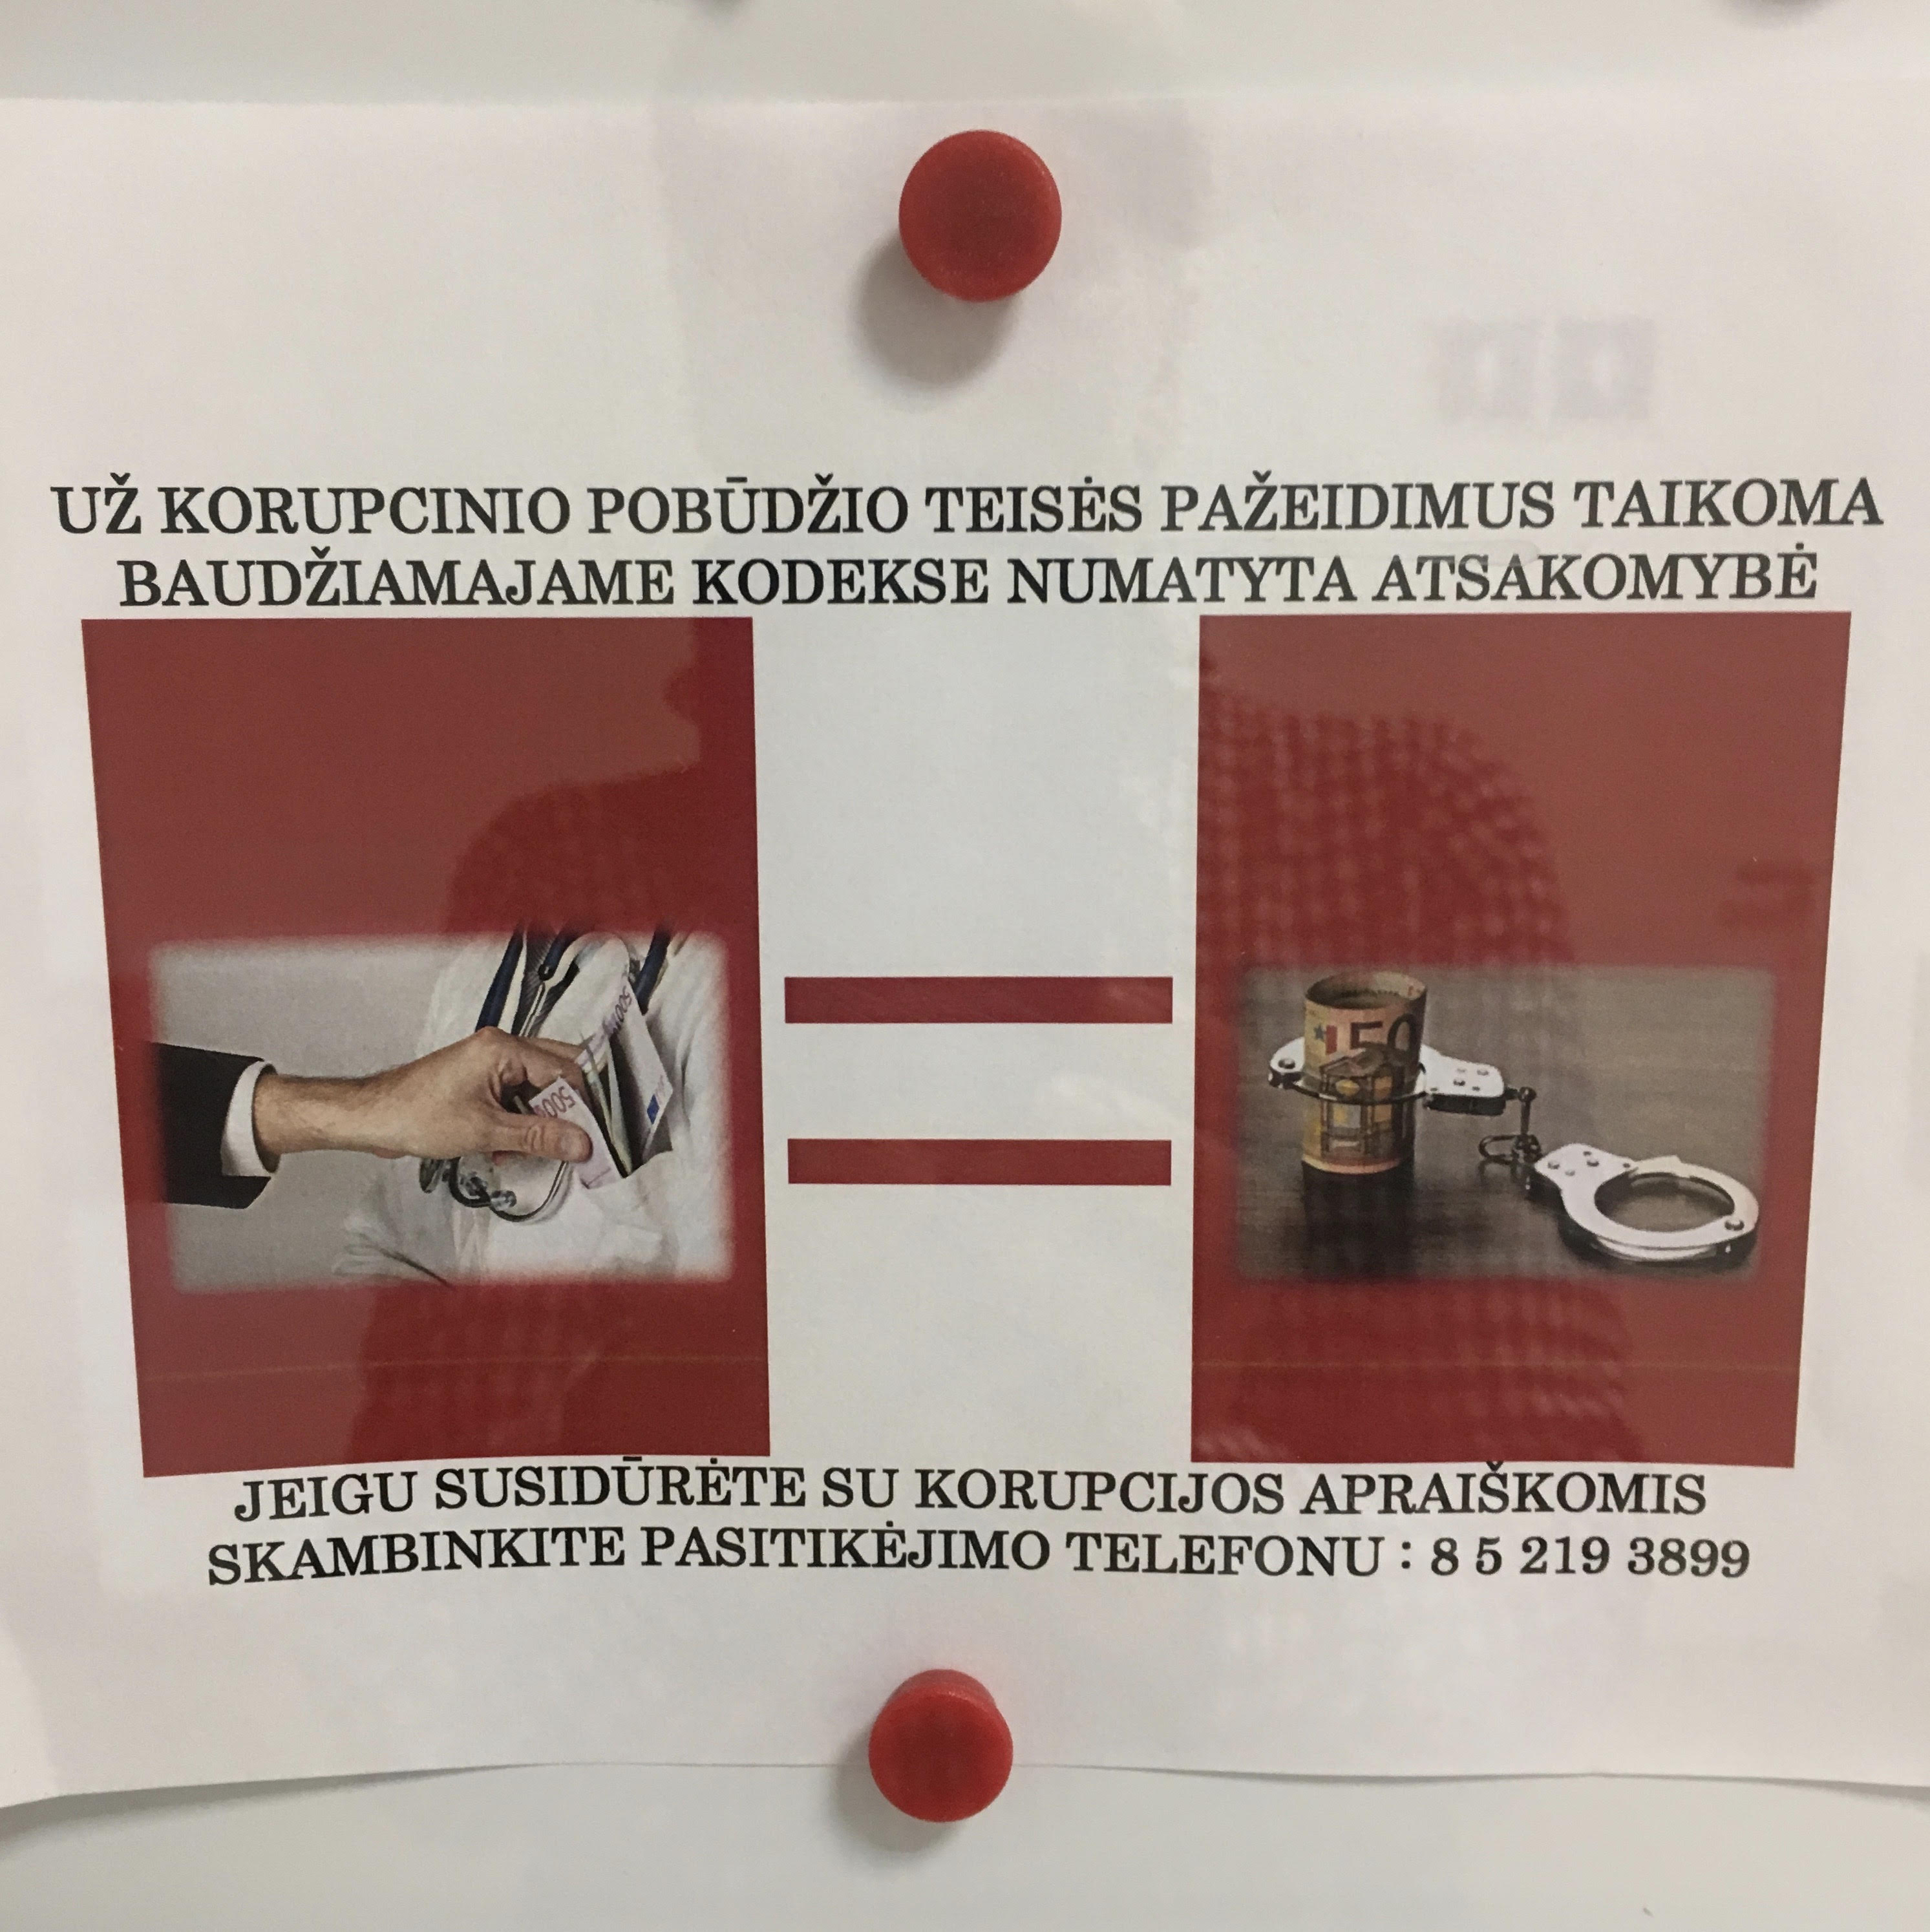 Photo was taken in Vilnius in 2017. "Corruption is a crime prosecuted by the Code of Criminal Procedure. If you encountered any signs of corruption, please call this trusted line. "